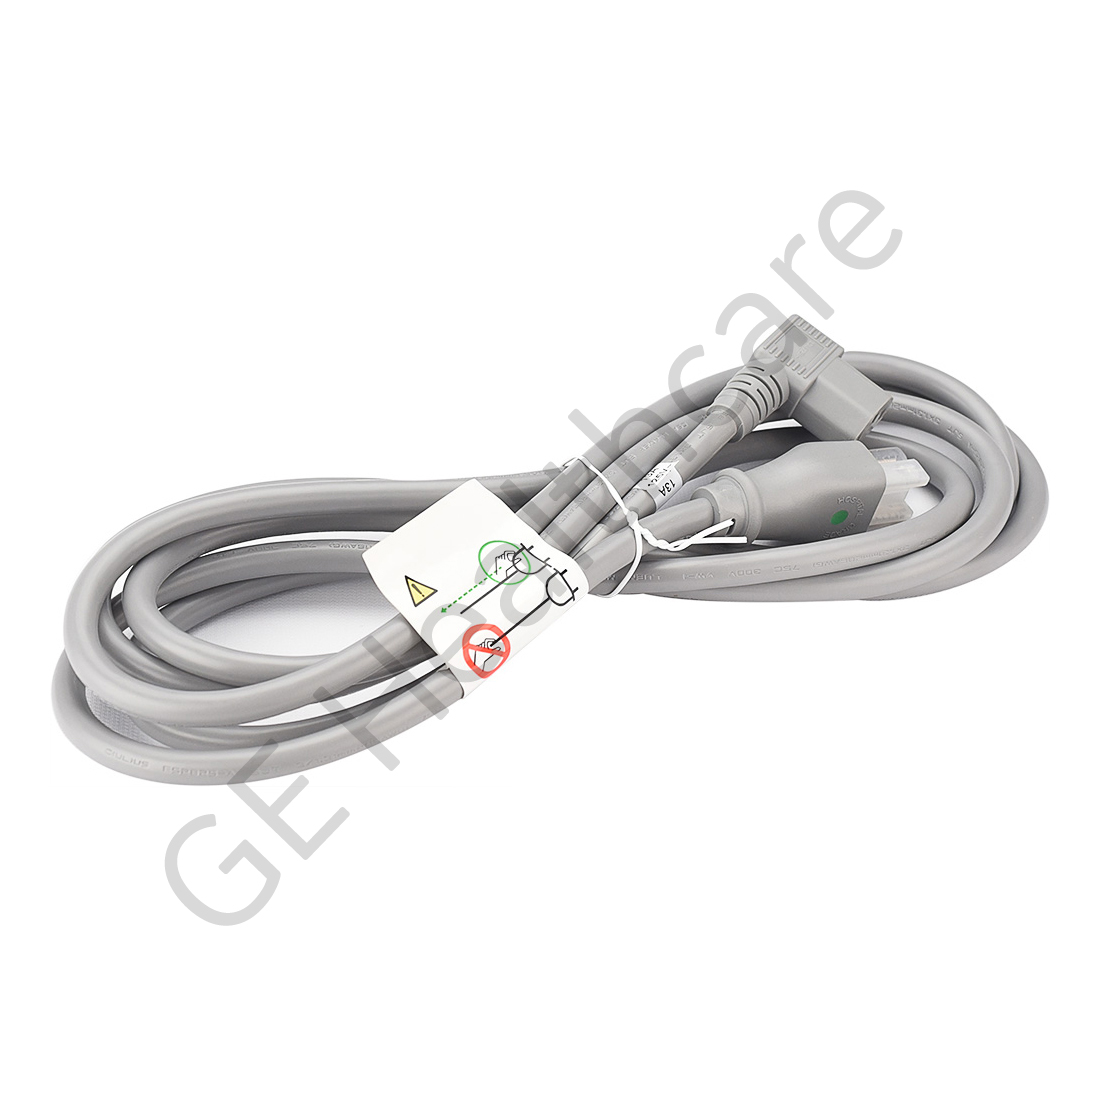 cable sum energia ra hosp grd 10a 125v 10ft